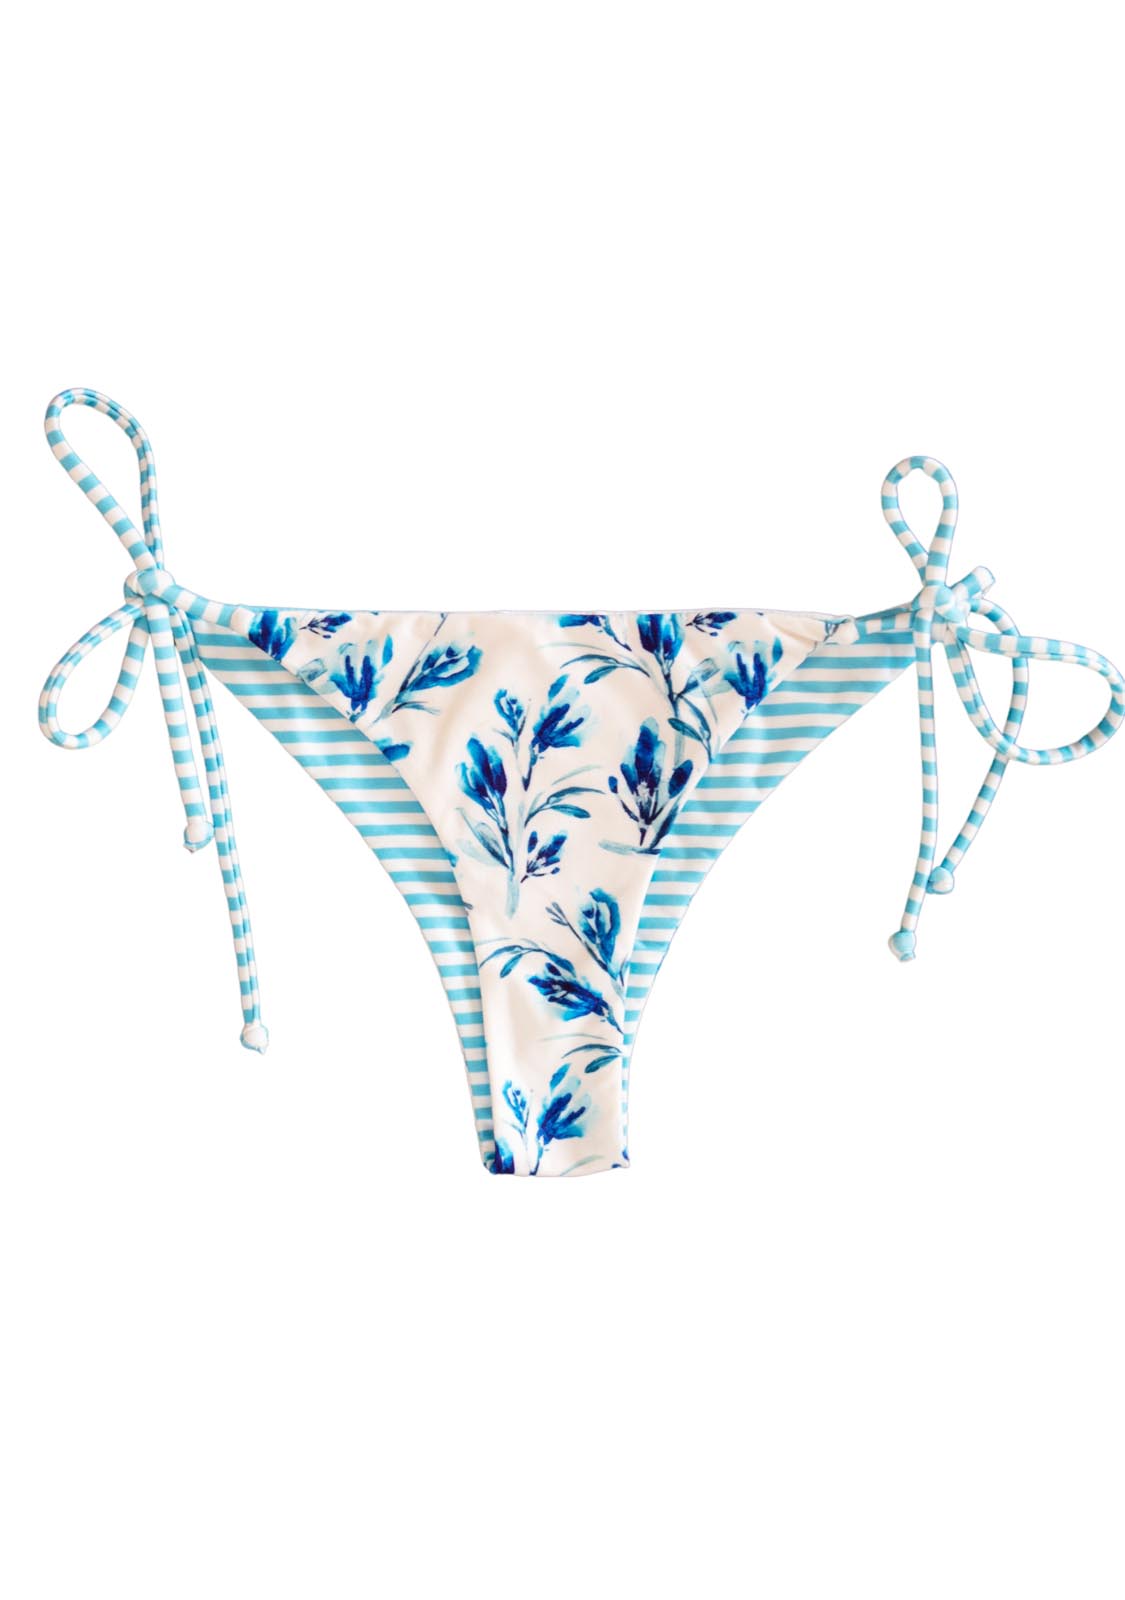 CHANCELOVES ECO REVERSIBLE Blue-WHITE STRIPED & Floral Cheeky BOTTOMS ...